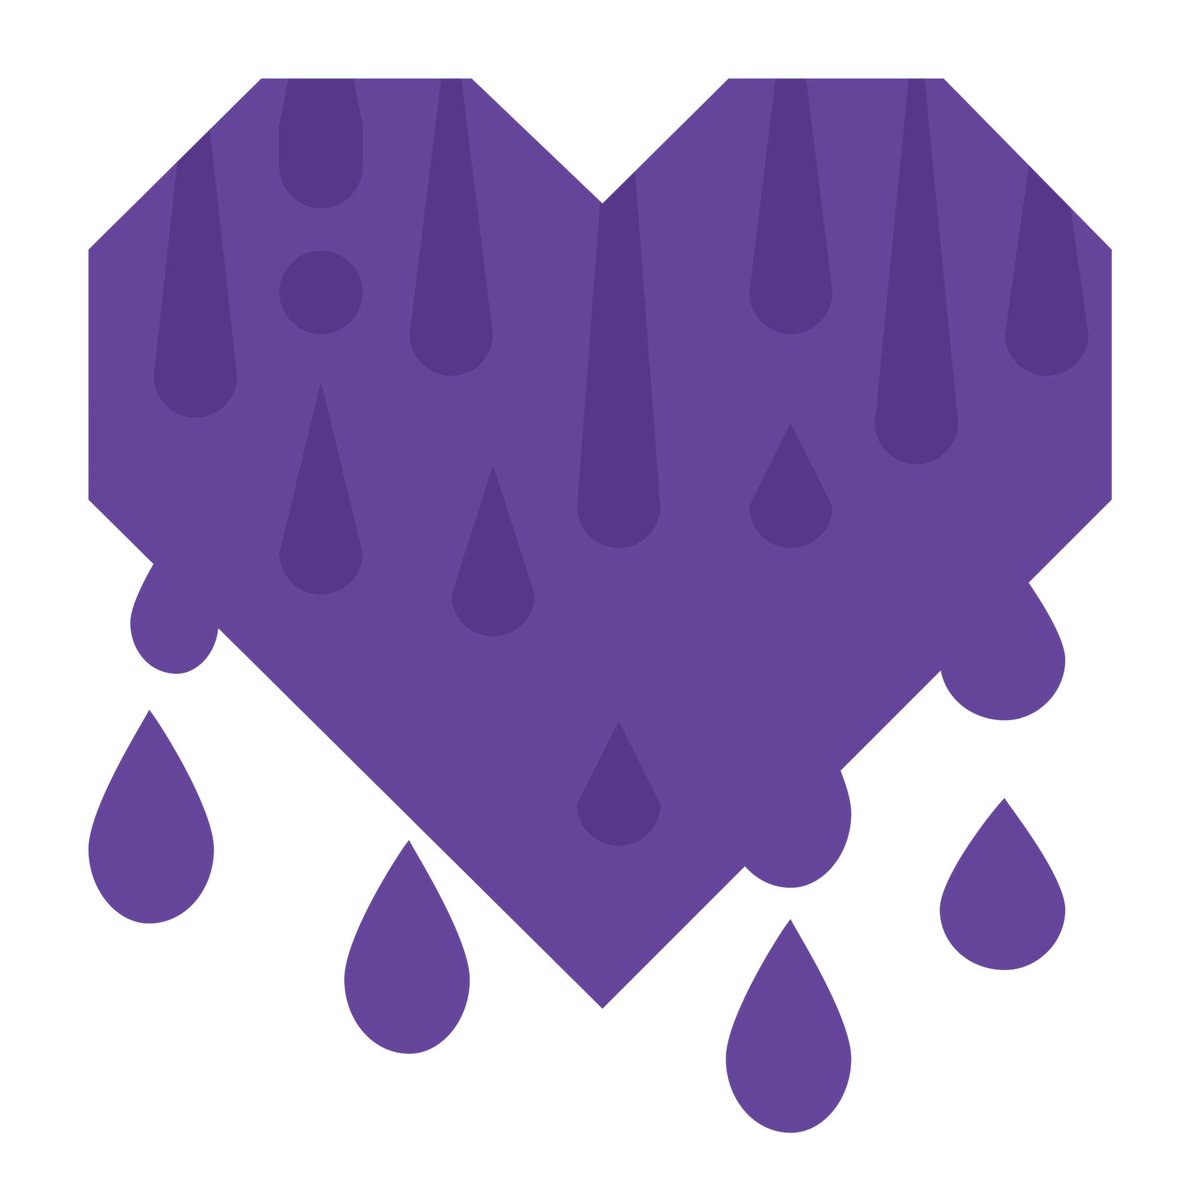 Now’s your chance, chat. Twitch is now adding 10% to all cheers on eligible channels when you use the :bleedpurple: Cheermote. Available for a limited time only, so go get your cheering on.